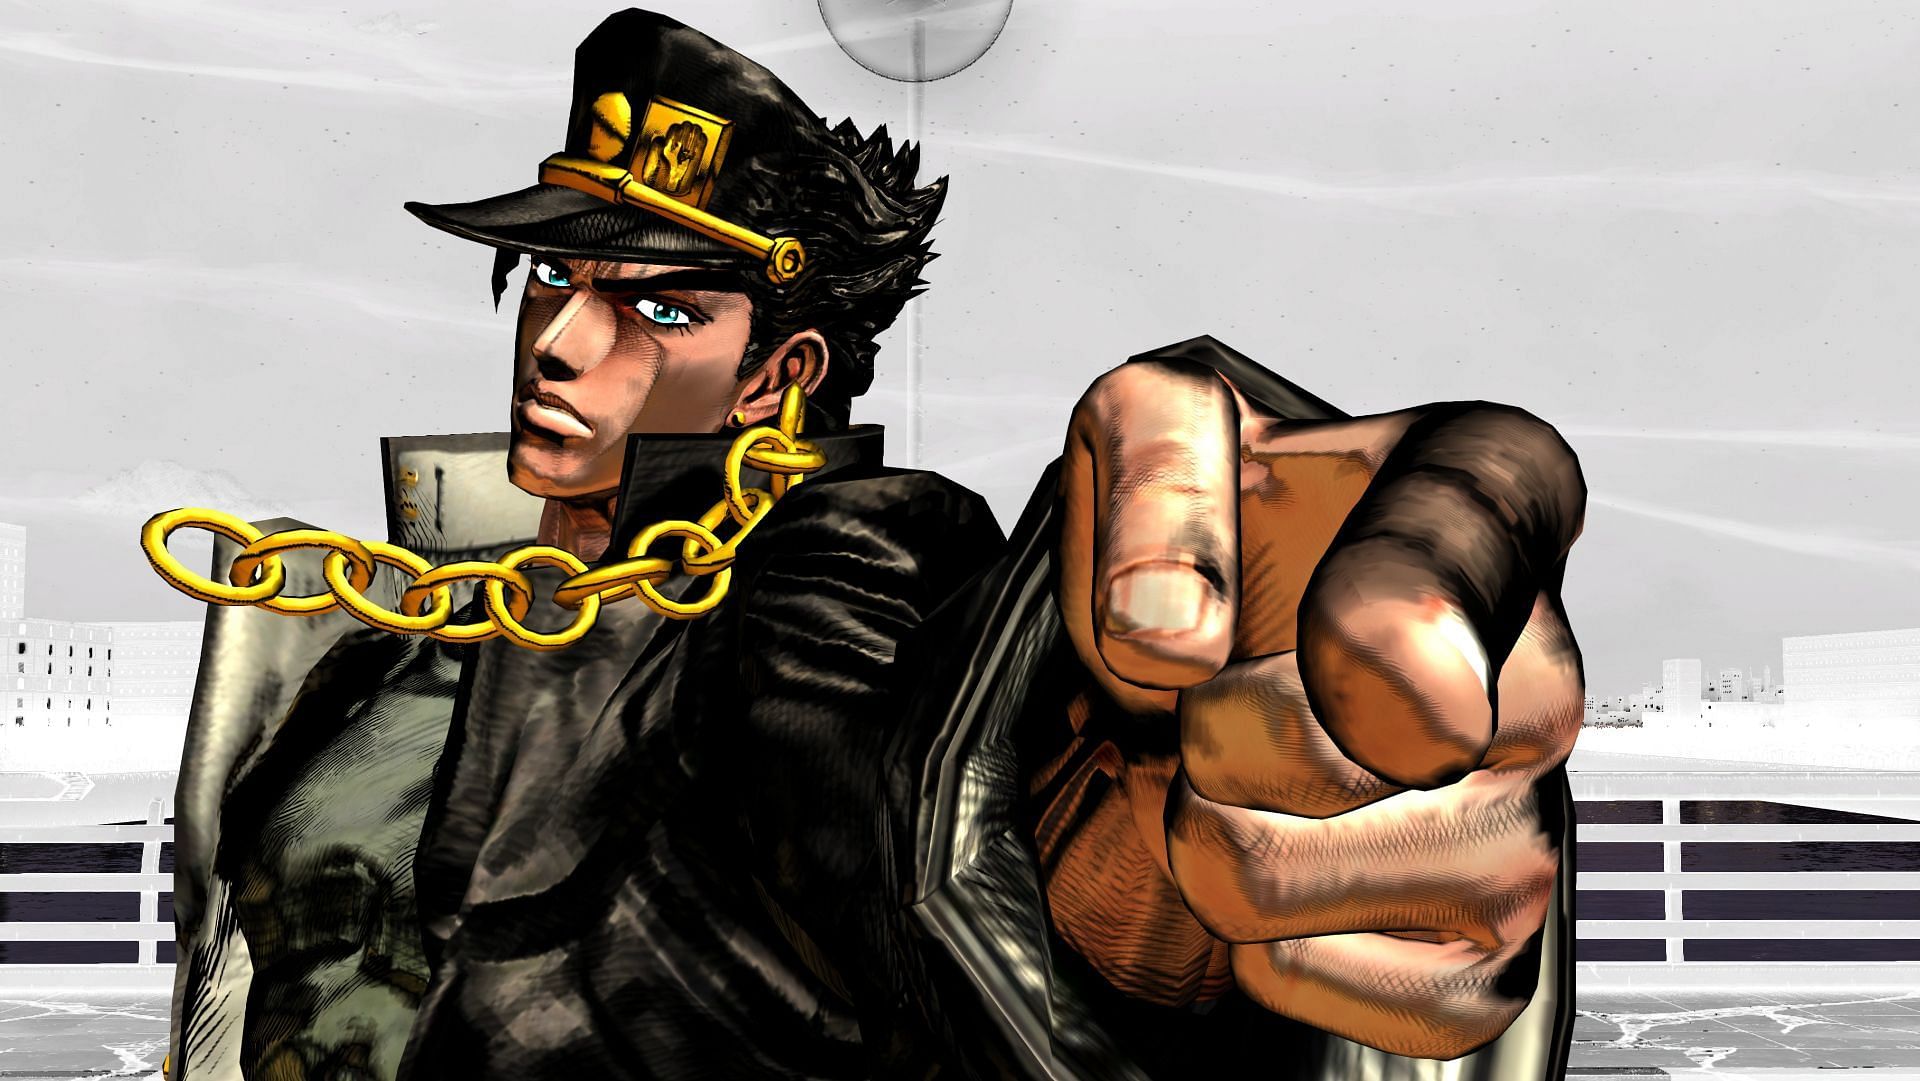 Bandai Namco has a strong lineup of games to showcase during Tokyo Game Show 2022, including the recently released JoJo